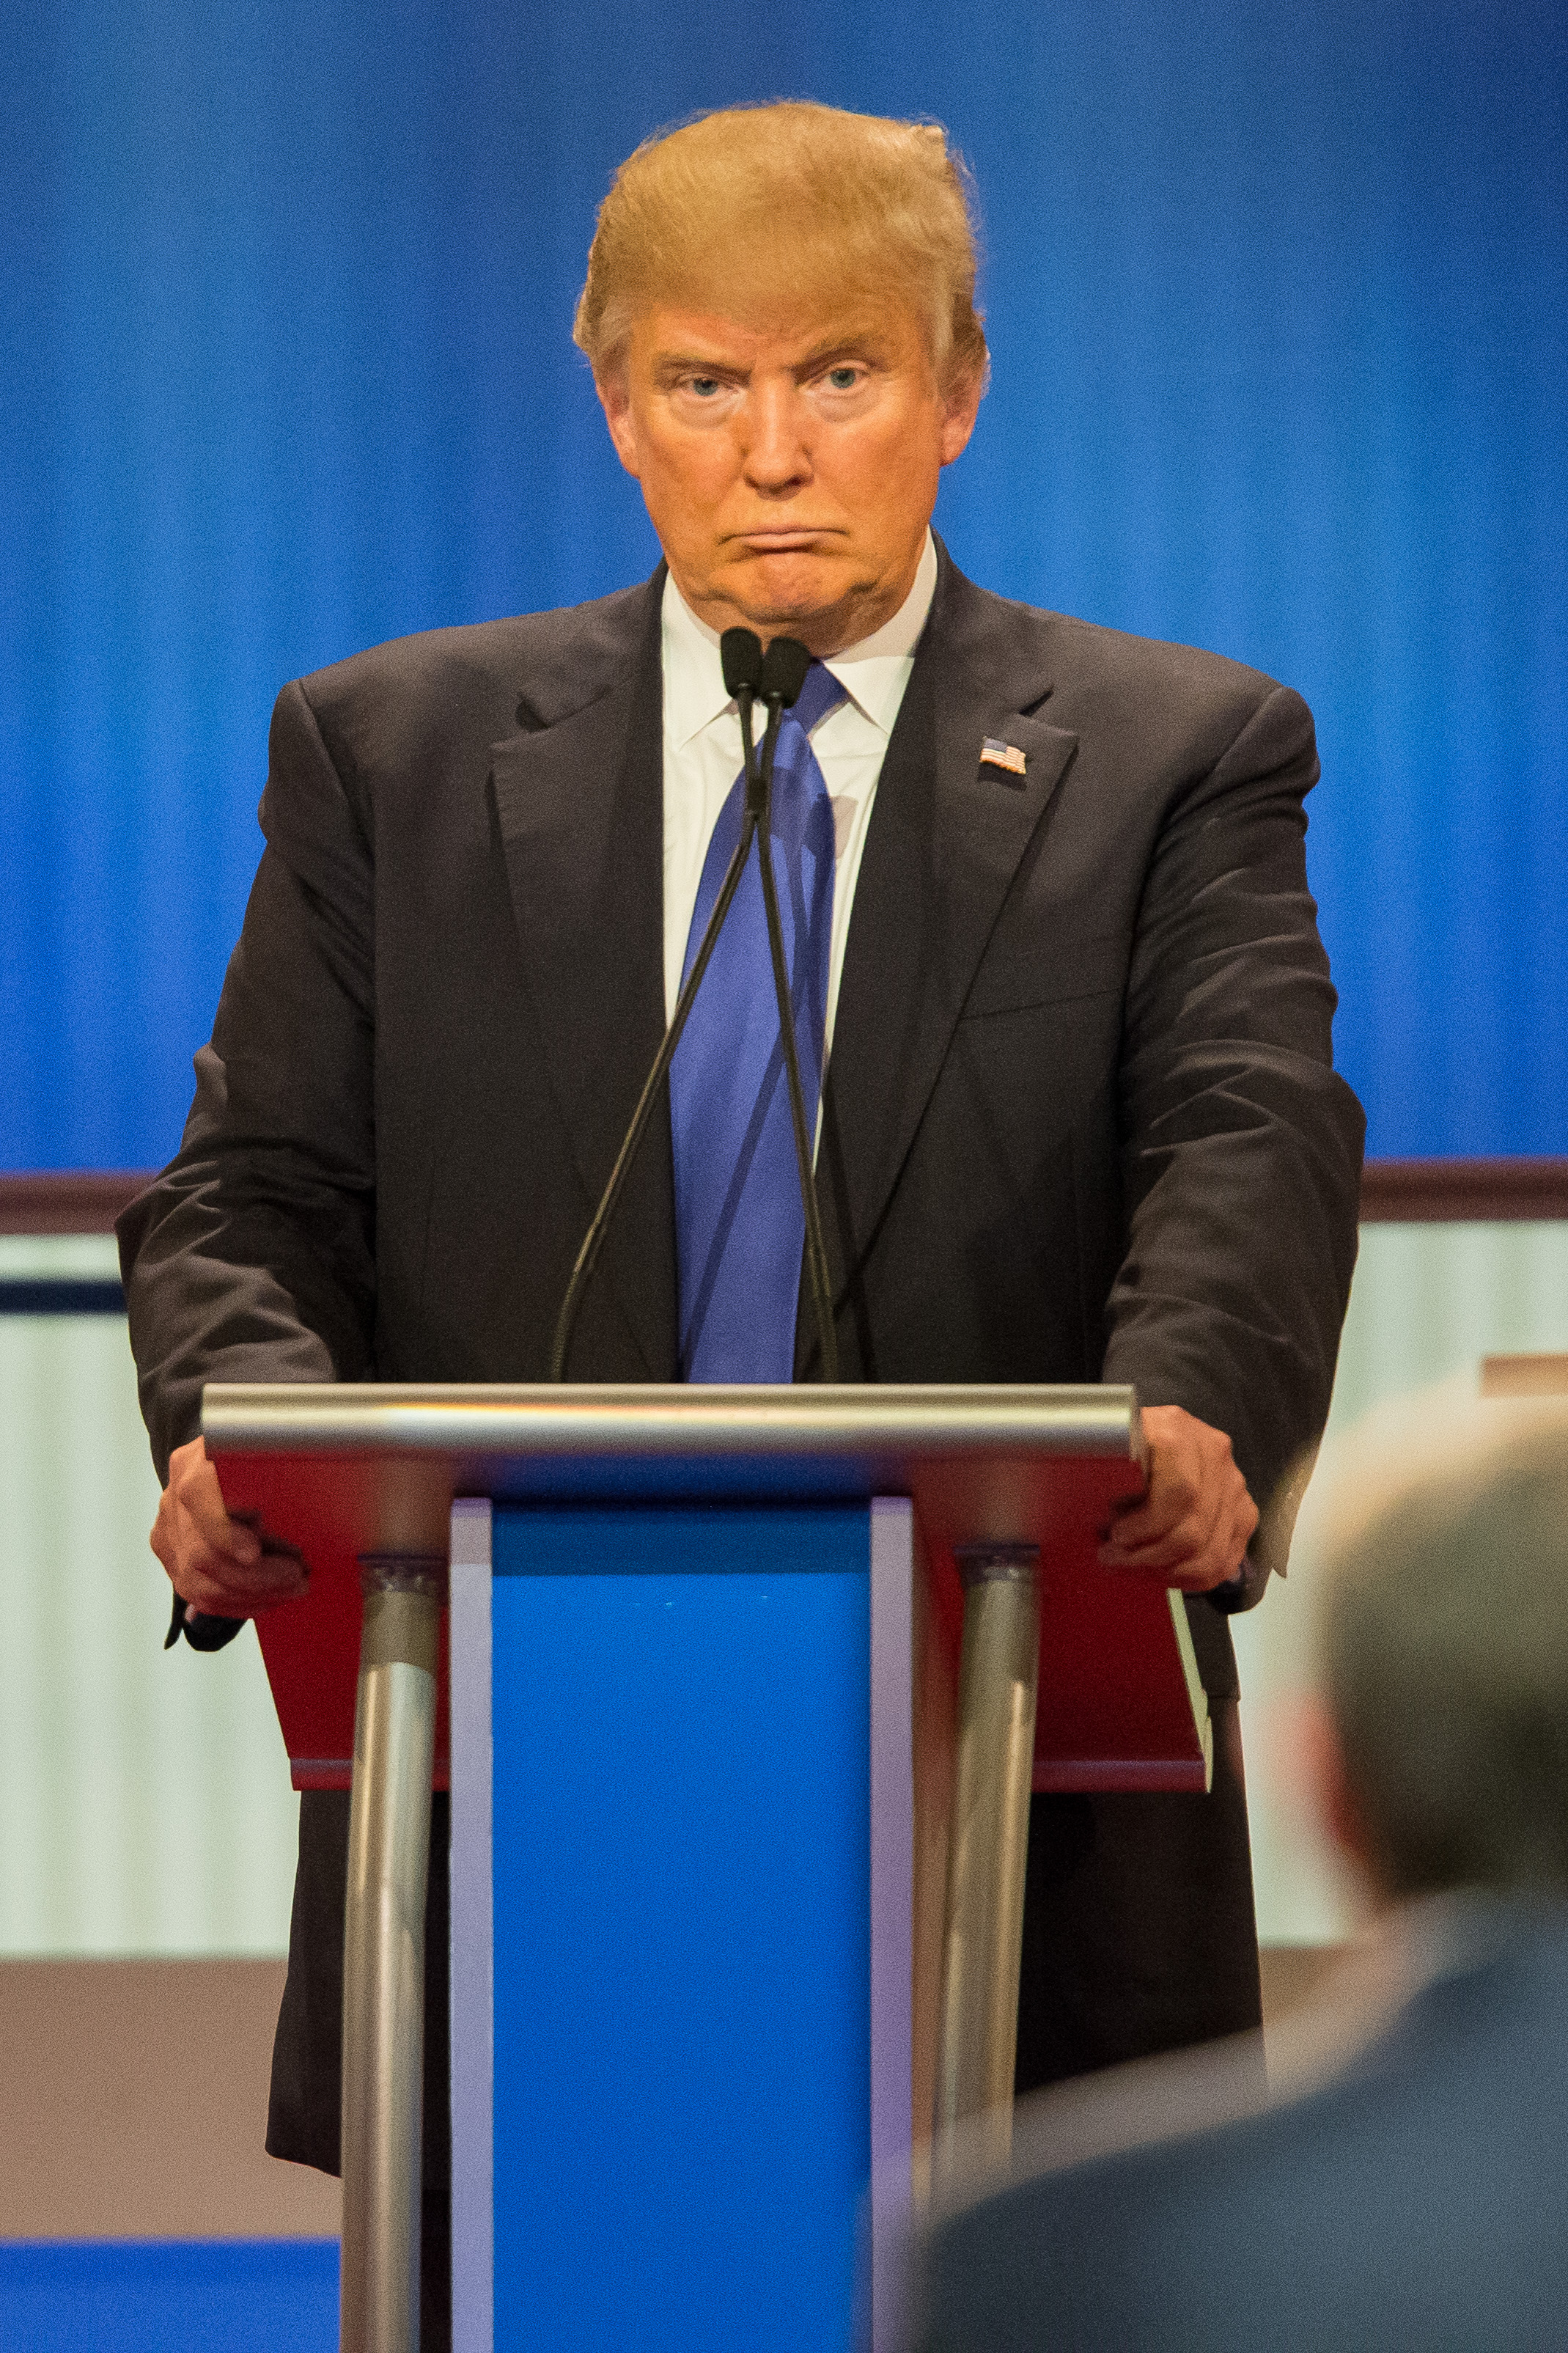 Republican Presidential candidate Donald Trump reacts to a question during the Republican Presidential Debate in Detroit, Michigan, March 3, 2016. (Geoff Robins—AFP/Getty Images)